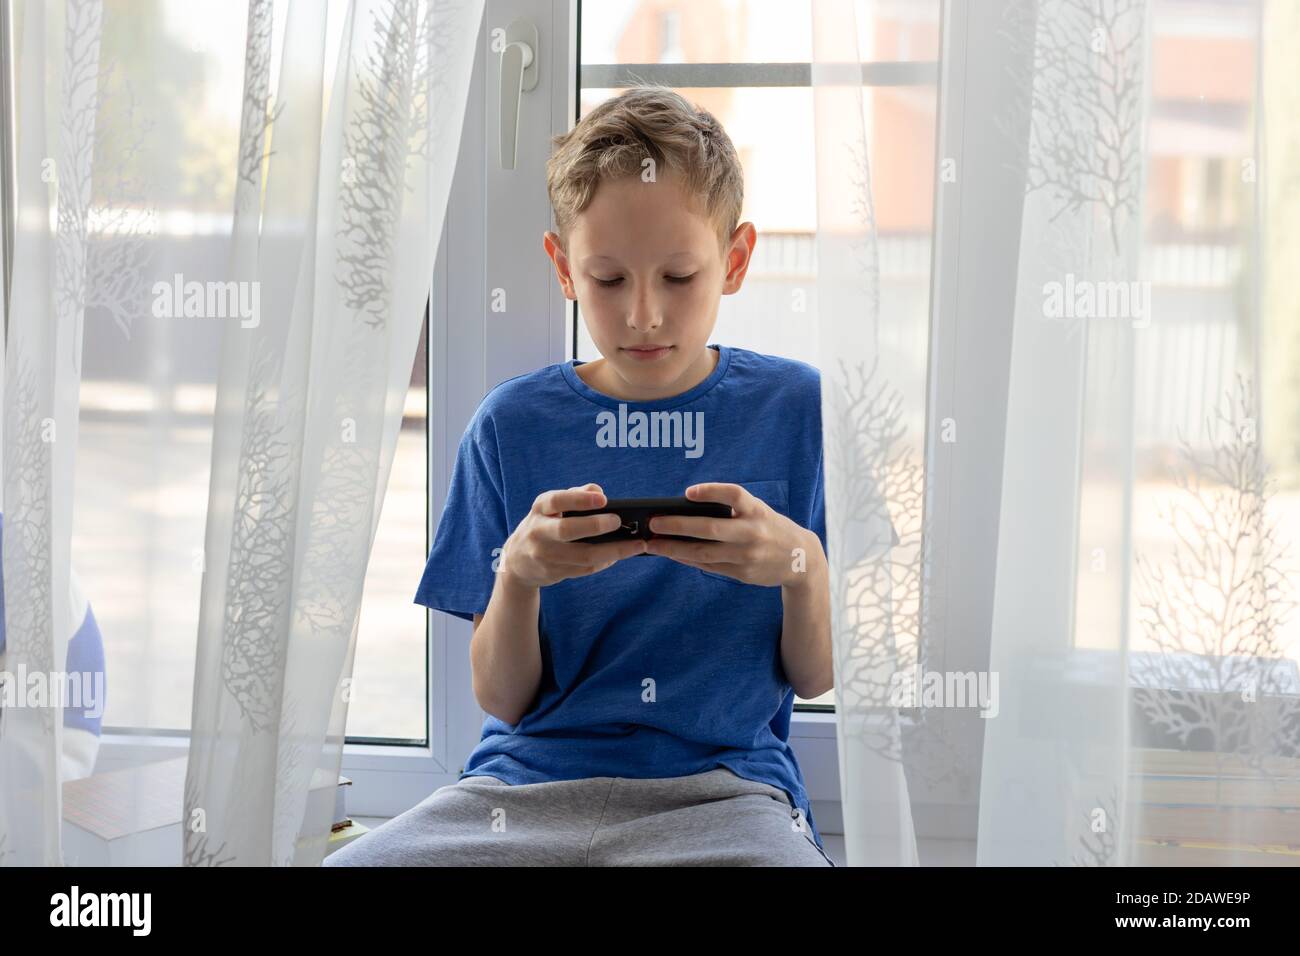 Preteen boy uses mobile phone, looking at the screen, playing, using apps. Stock Photo